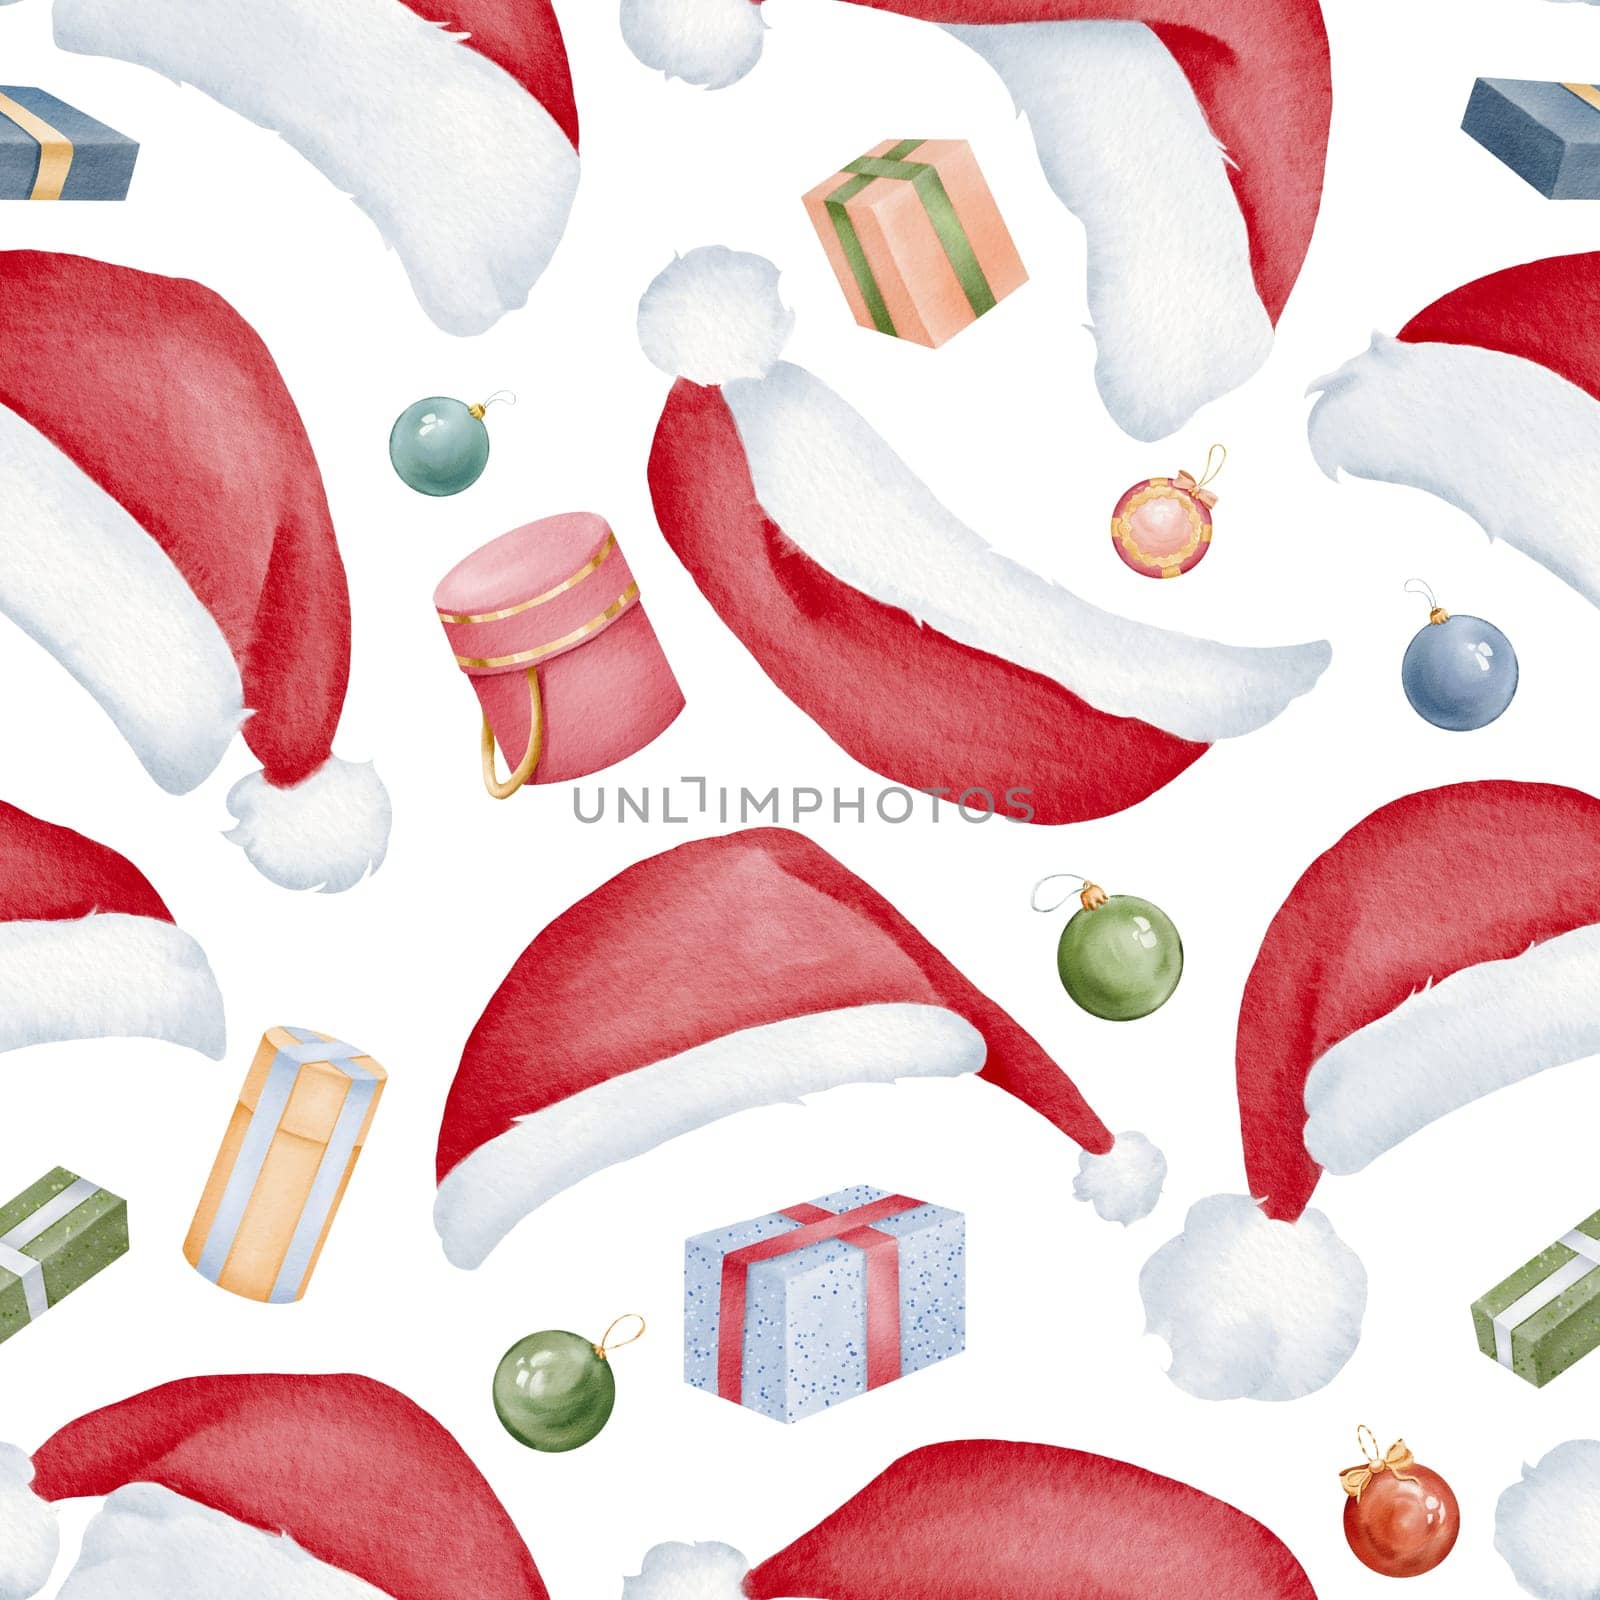 Seamless pattern. Presents. Santa Claus hat. Winter clothes. Christmas red hat in new year holiday cartoon design. for greeting card, postcards party invitations, posters, greetings, websites, stories.